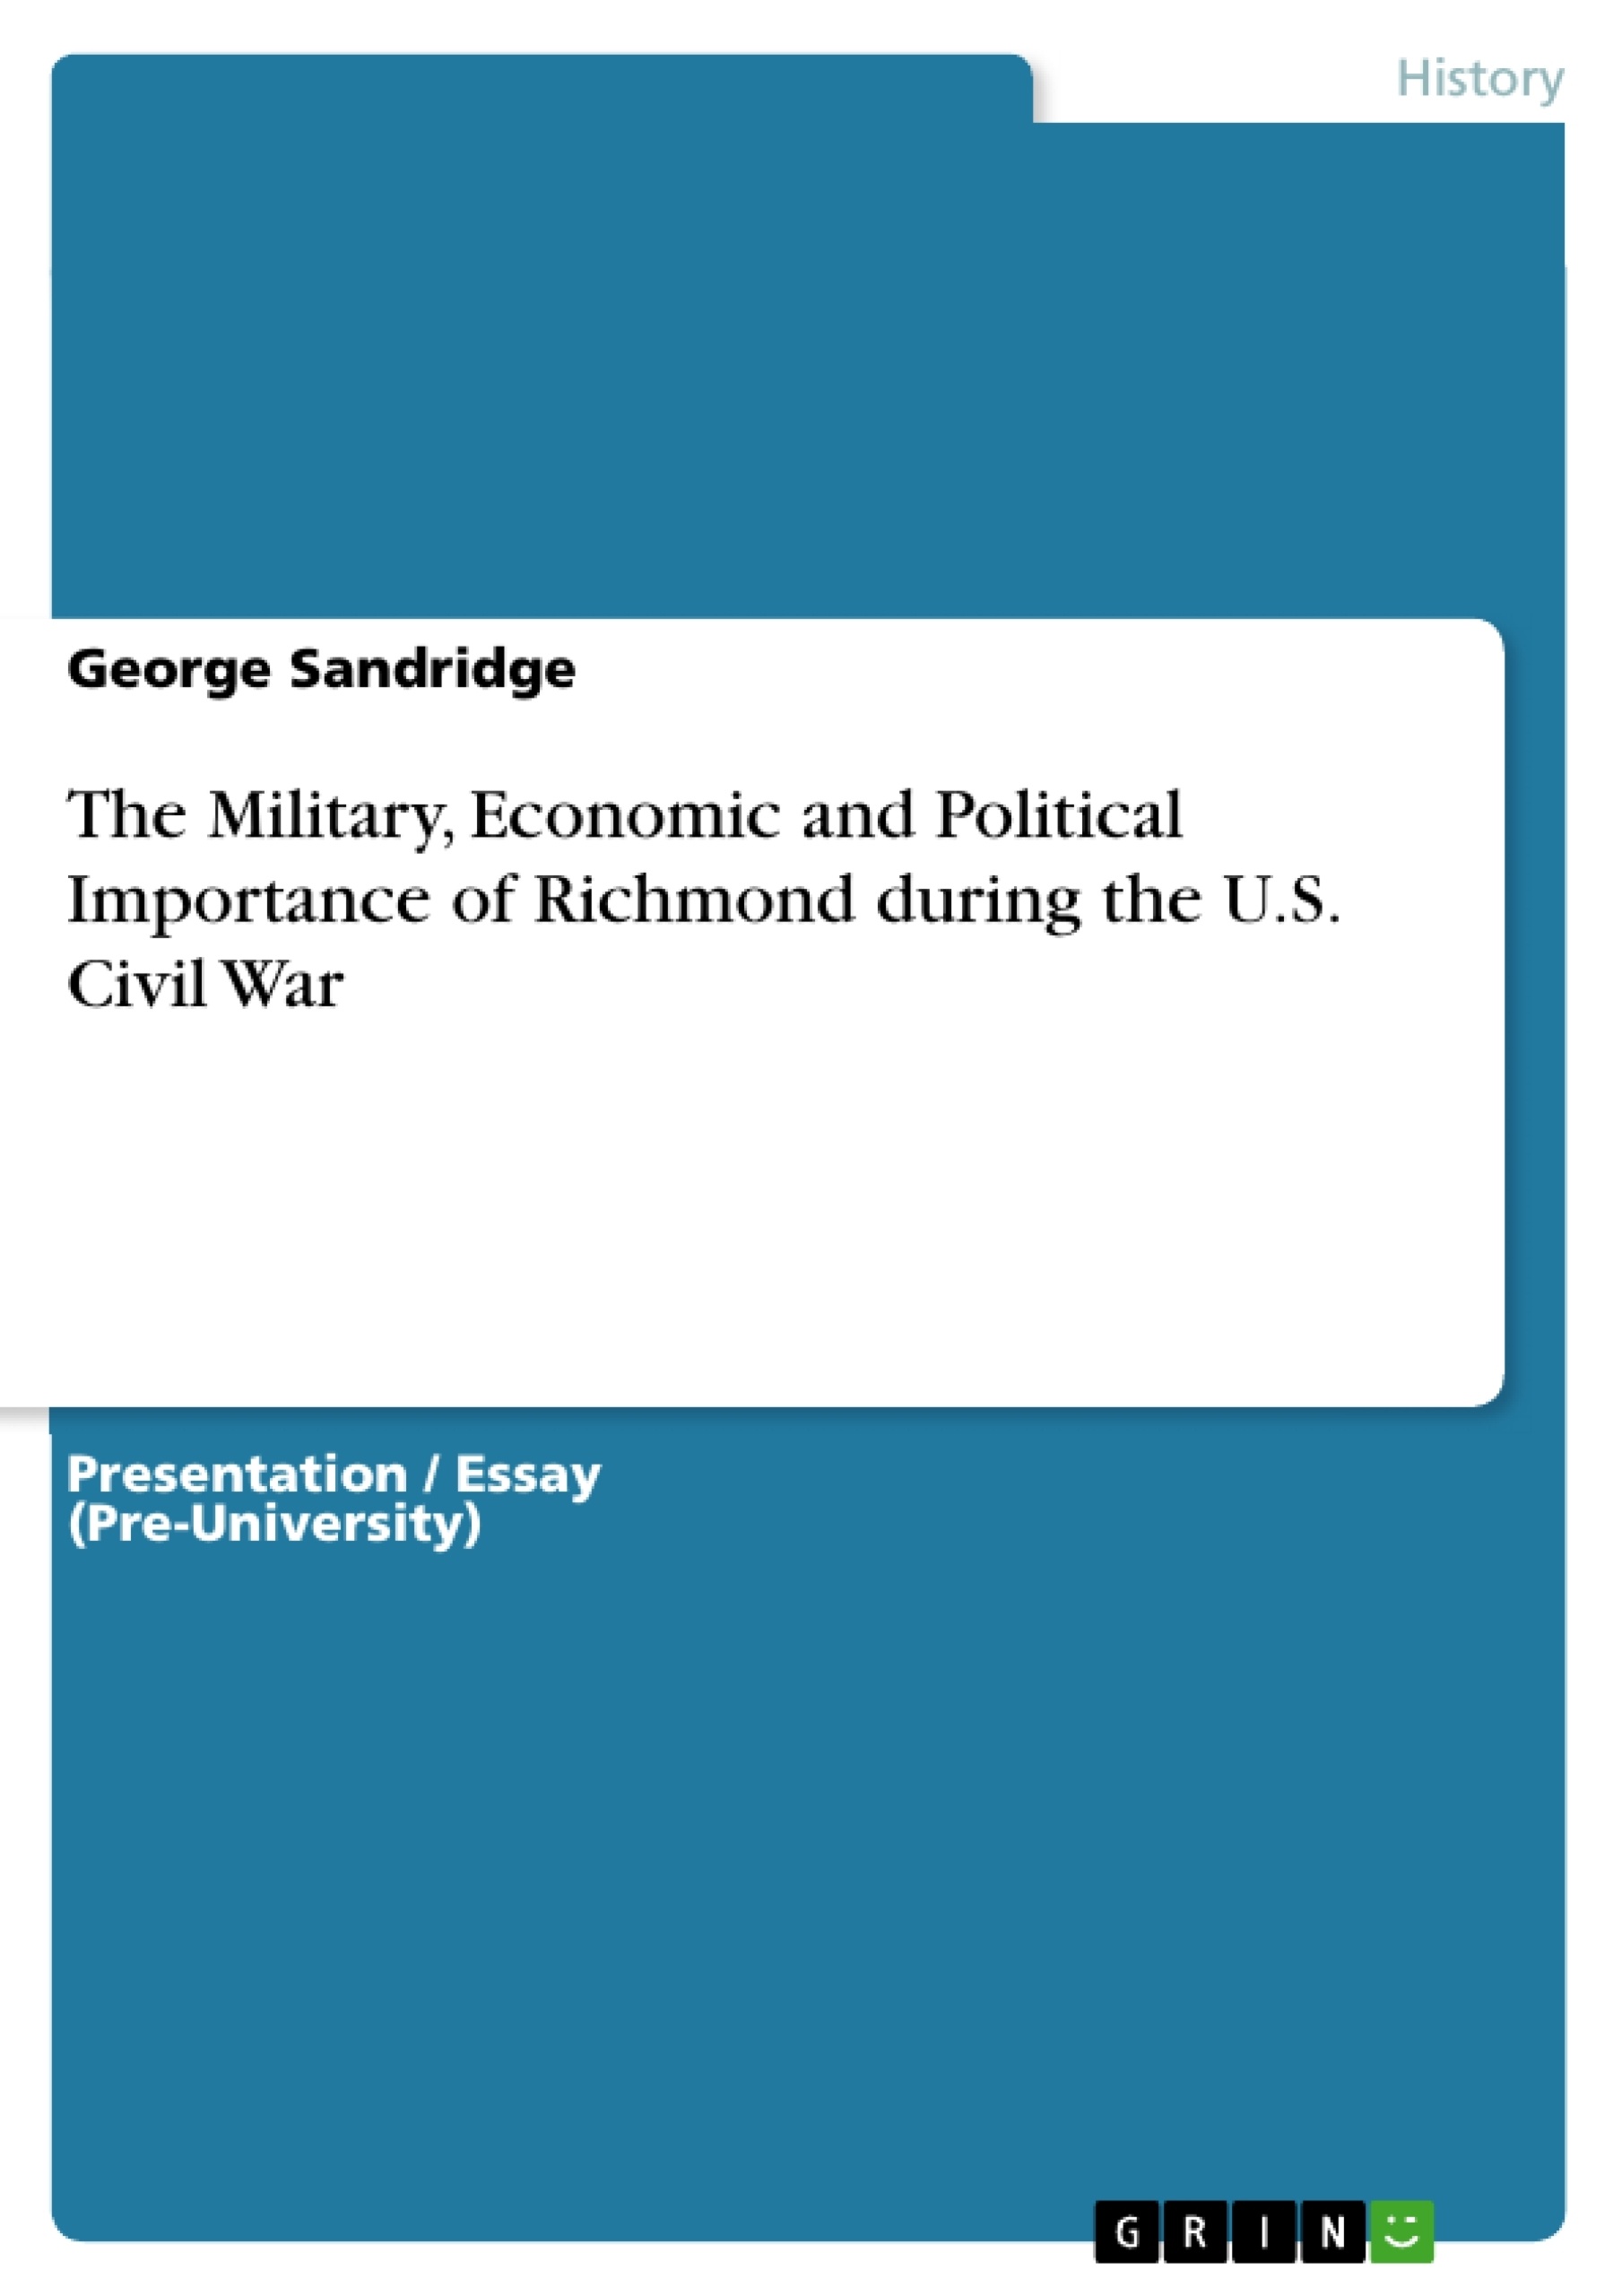 Title: The Military, Economic and Political Importance of Richmond during the U.S. Civil War